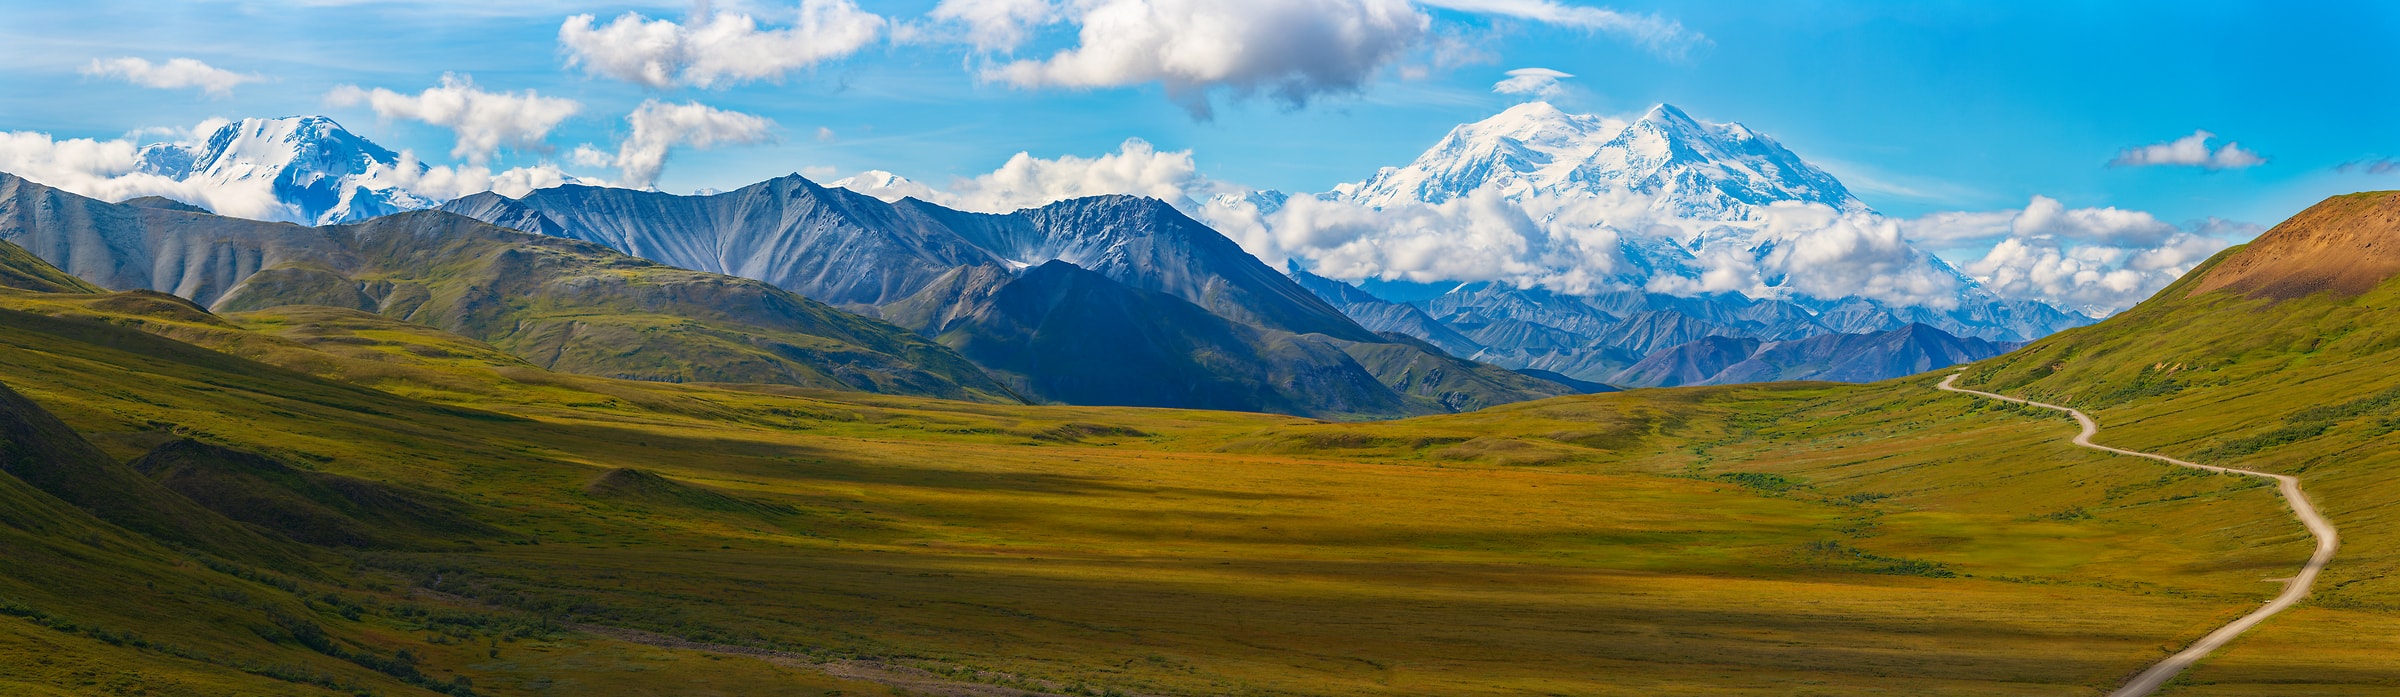 281 megapixels! A very high resolution, large-format VAST photo print of a road leading across the tundra to Denali; landscape photograph created by John Freeman in Stony Pass Overlook, Denali National Park & Preserve, Alaska